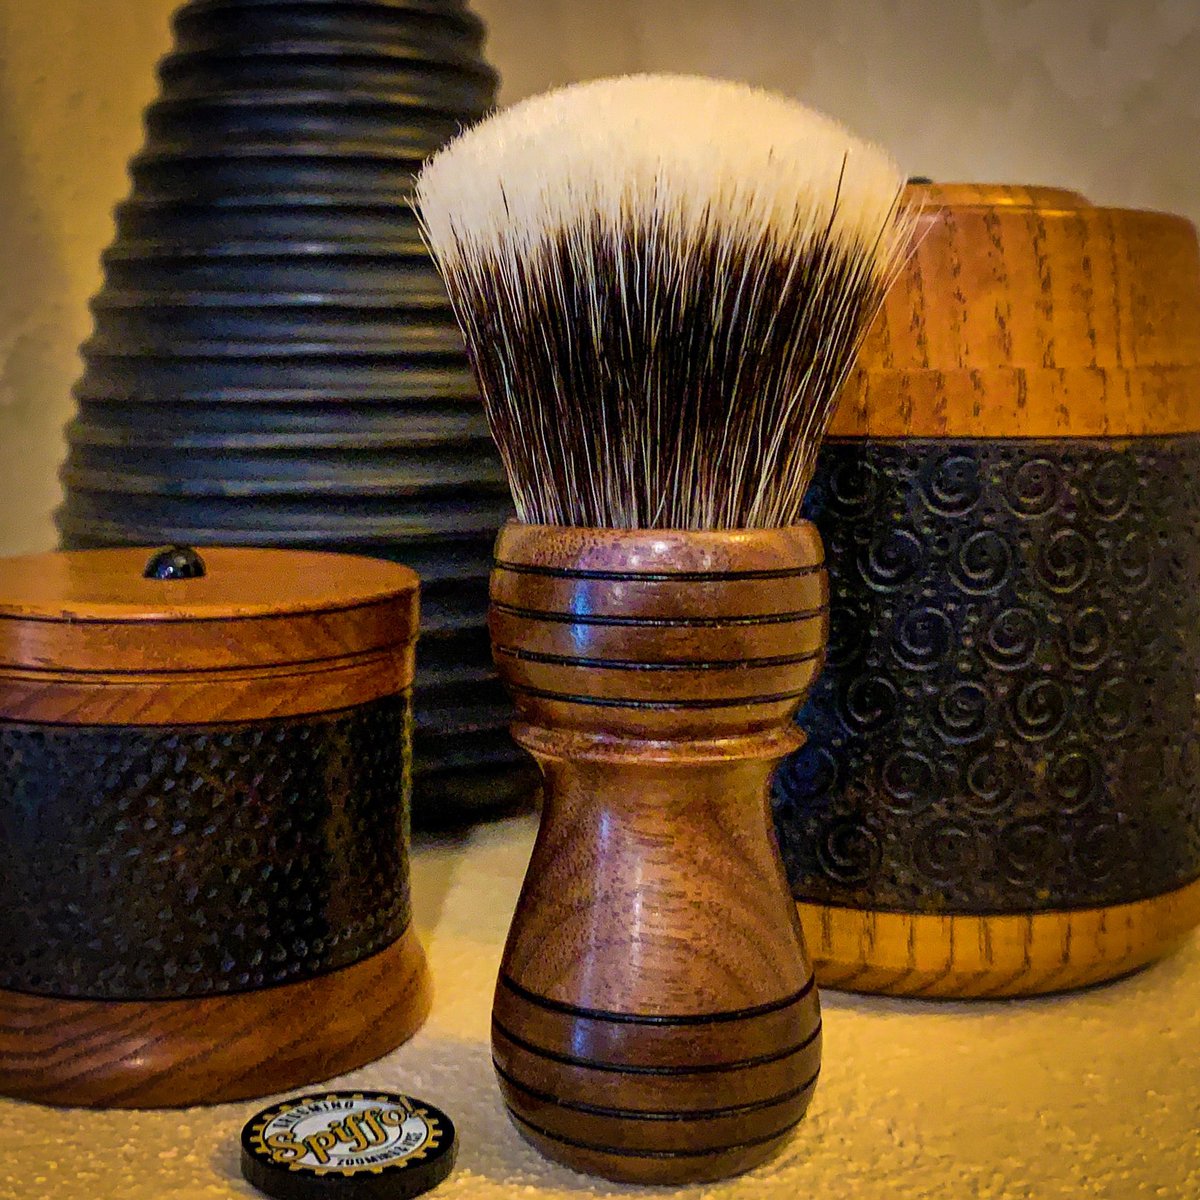 Caluum, a solid Black Walnut shaving brush with its ringed handle and 24mm super high-density Manchurian Two Band badger knot, is standout elegant in its simplicity! #wetshaving #shaving #spiffo #traditionalshaving #shavingbrushes #shavingbrush #oldschoolshaving #spiffoman